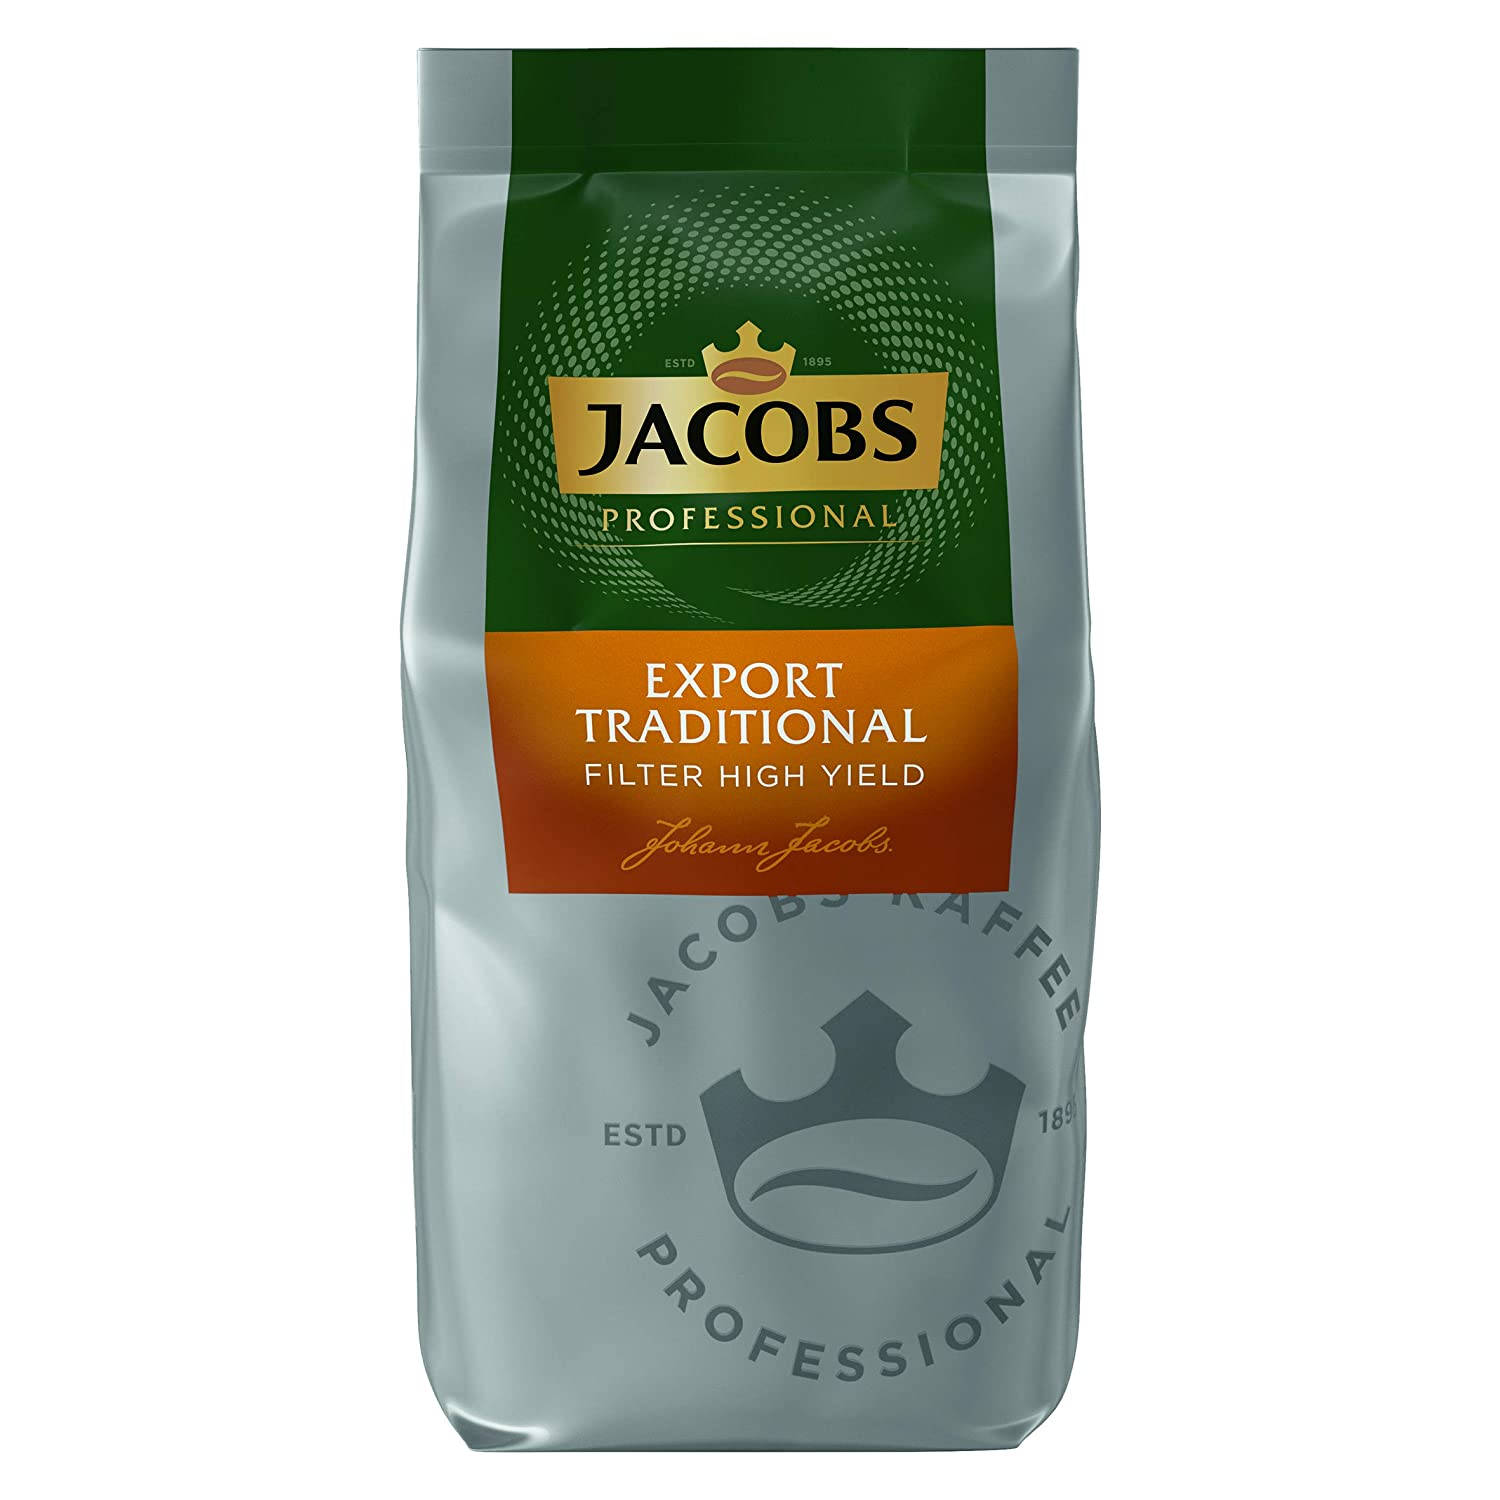 (Filtermaschinen, Yield Filterkaffee French 2x800g Press) Professional JACOBS Export High Traditional